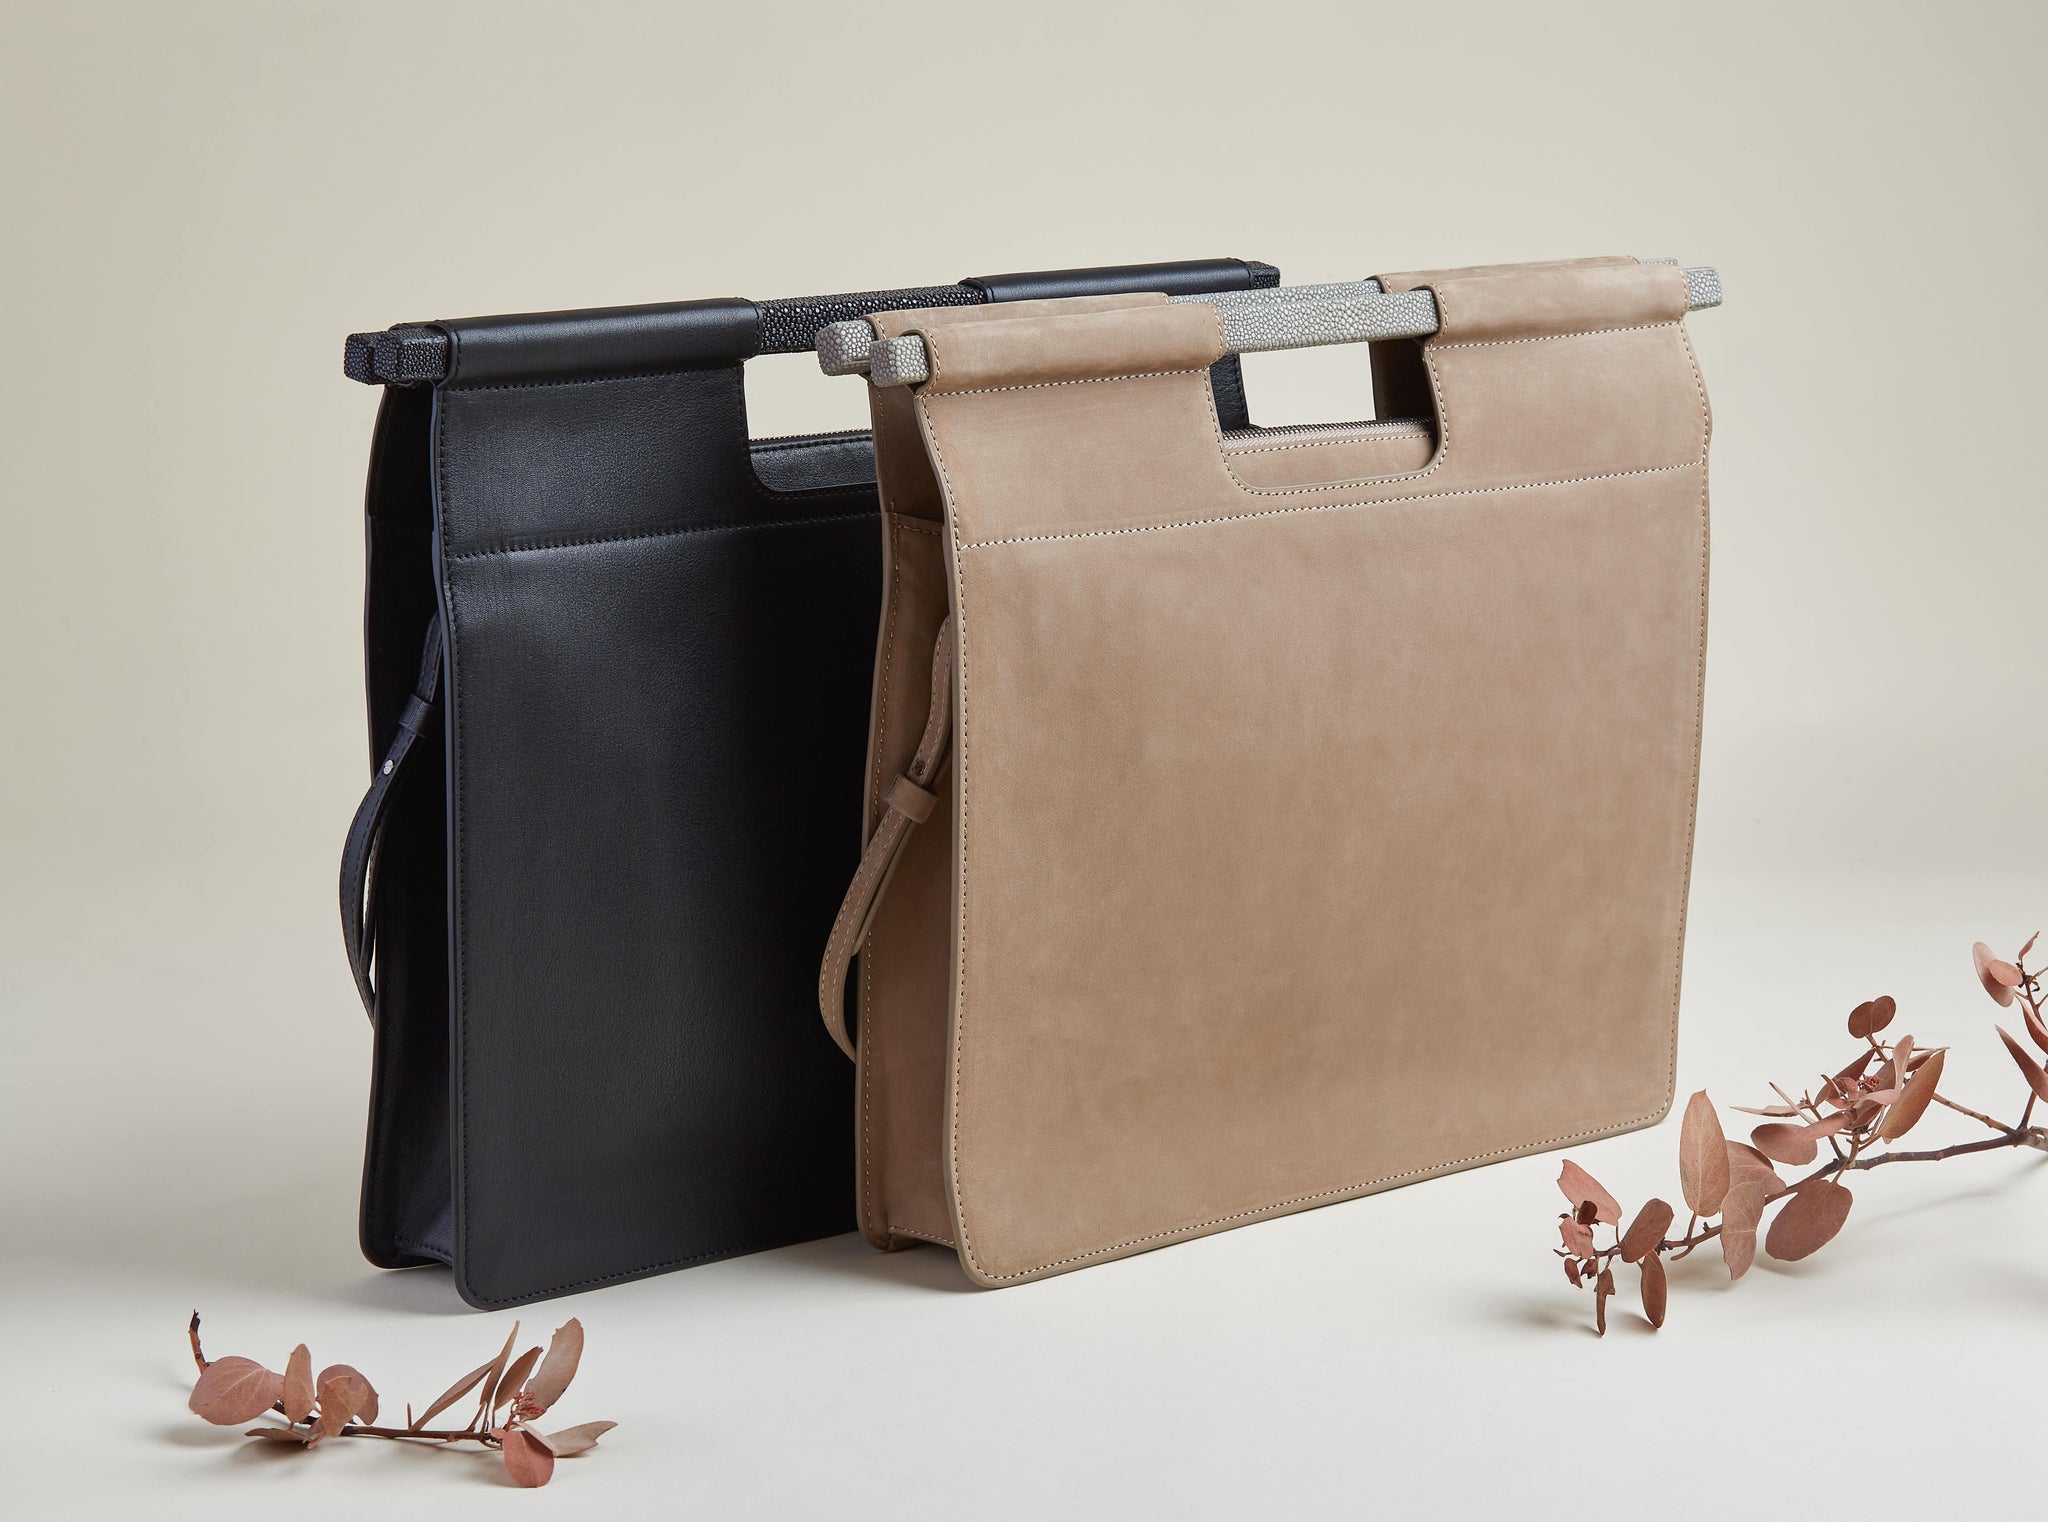 Luxury leather totes minimalist with Shagreen accents